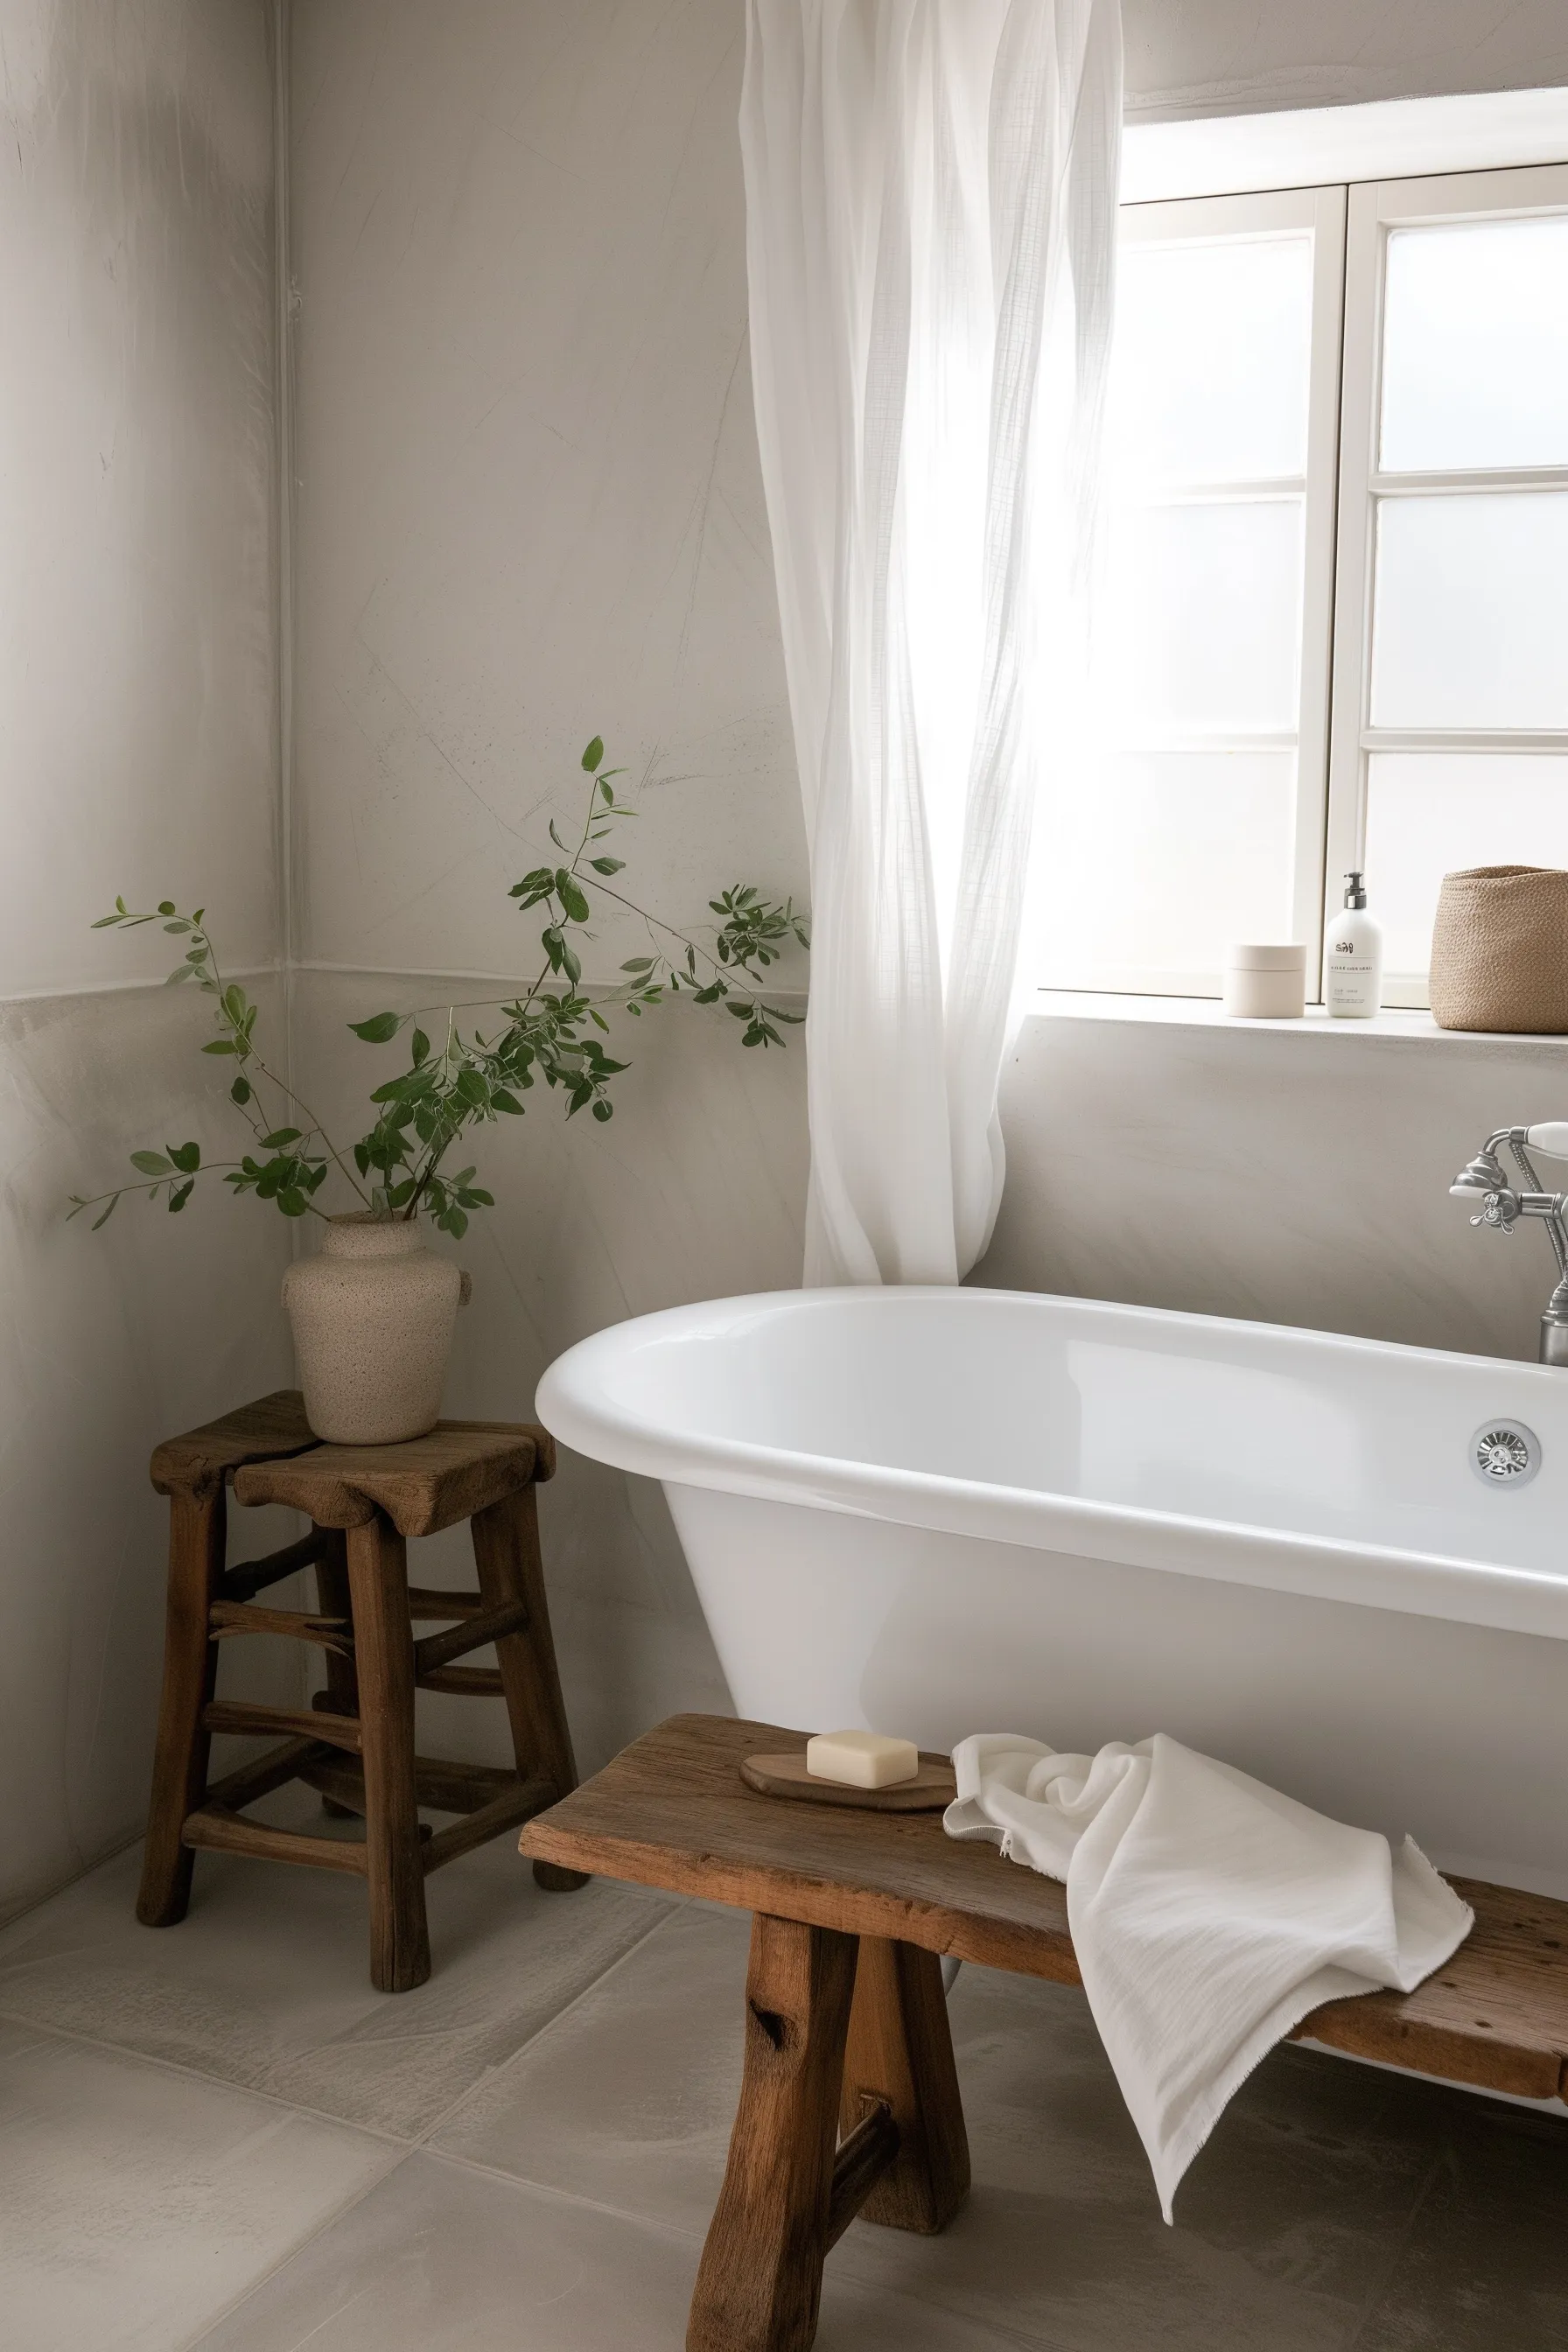 A white walled bathroom with rattan furniture and wooden accents